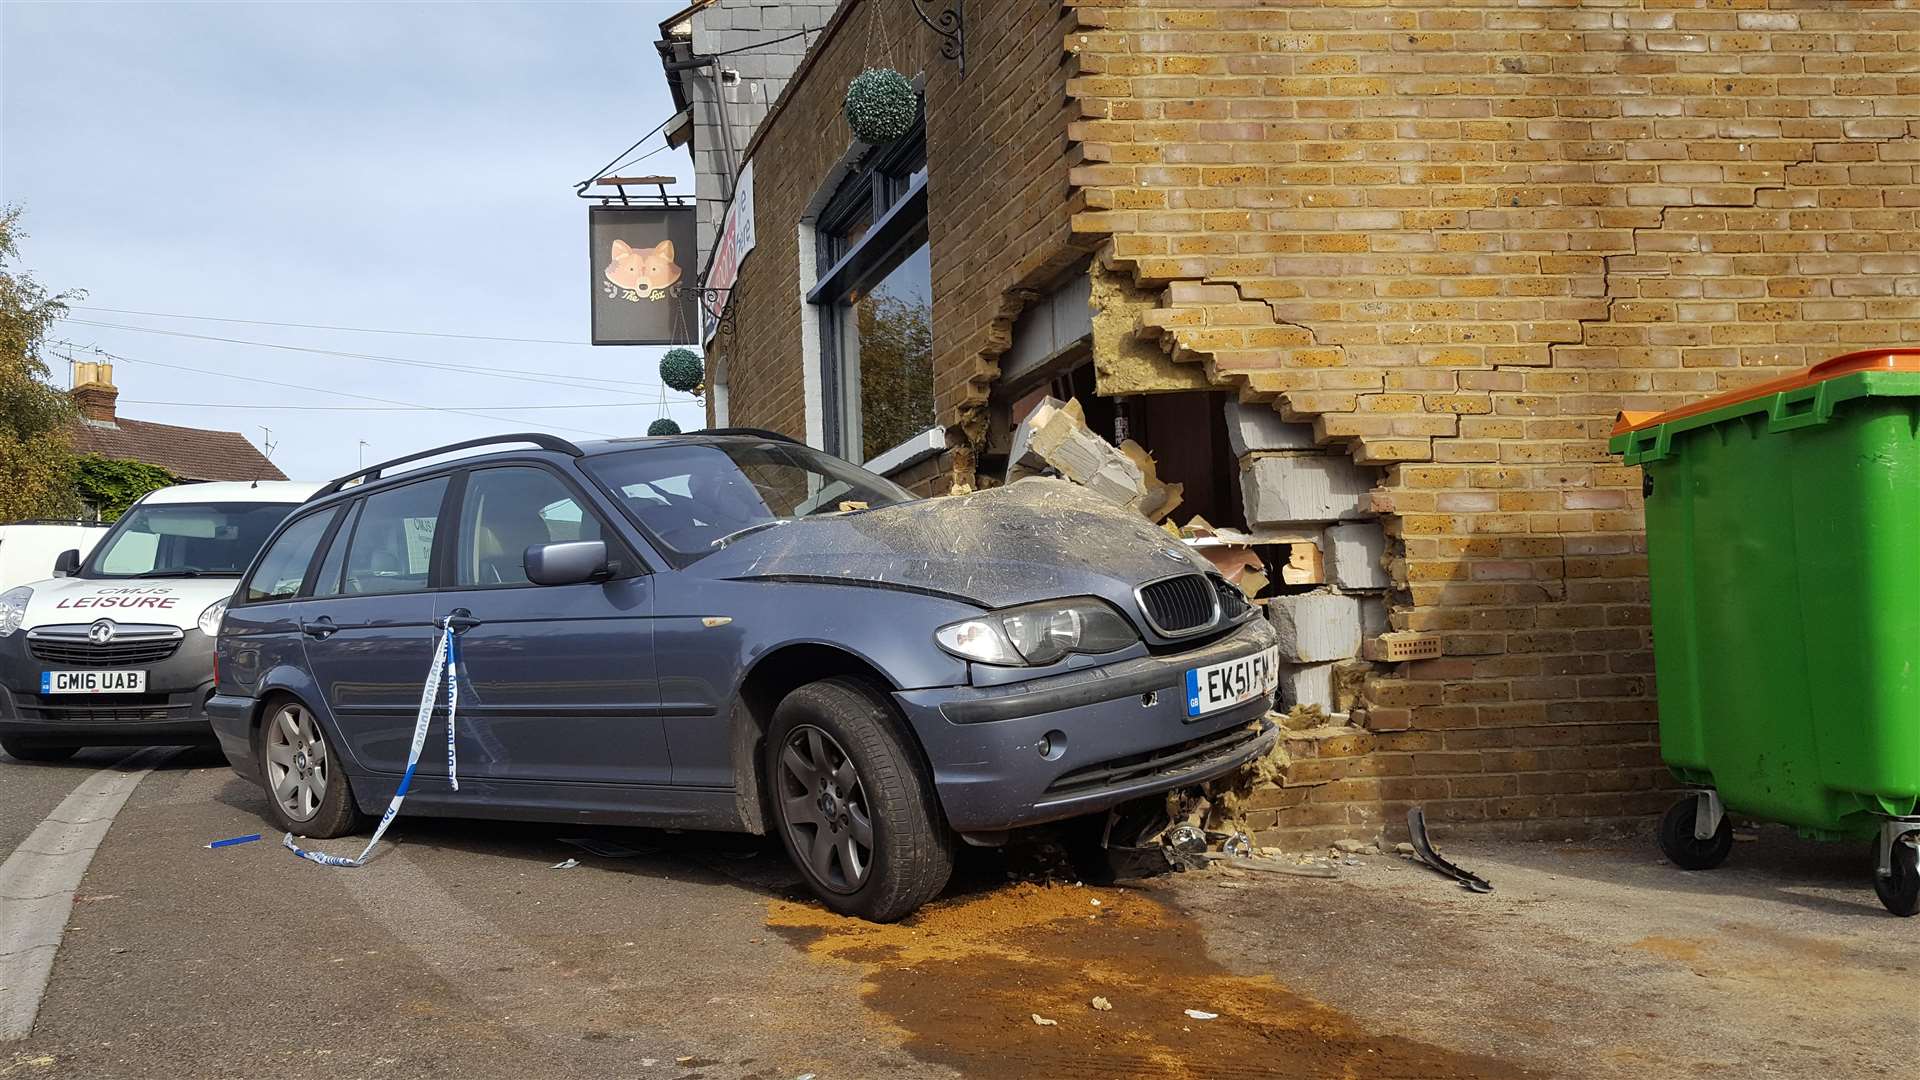 The blue BMW smashed into the corner of the pub's extension